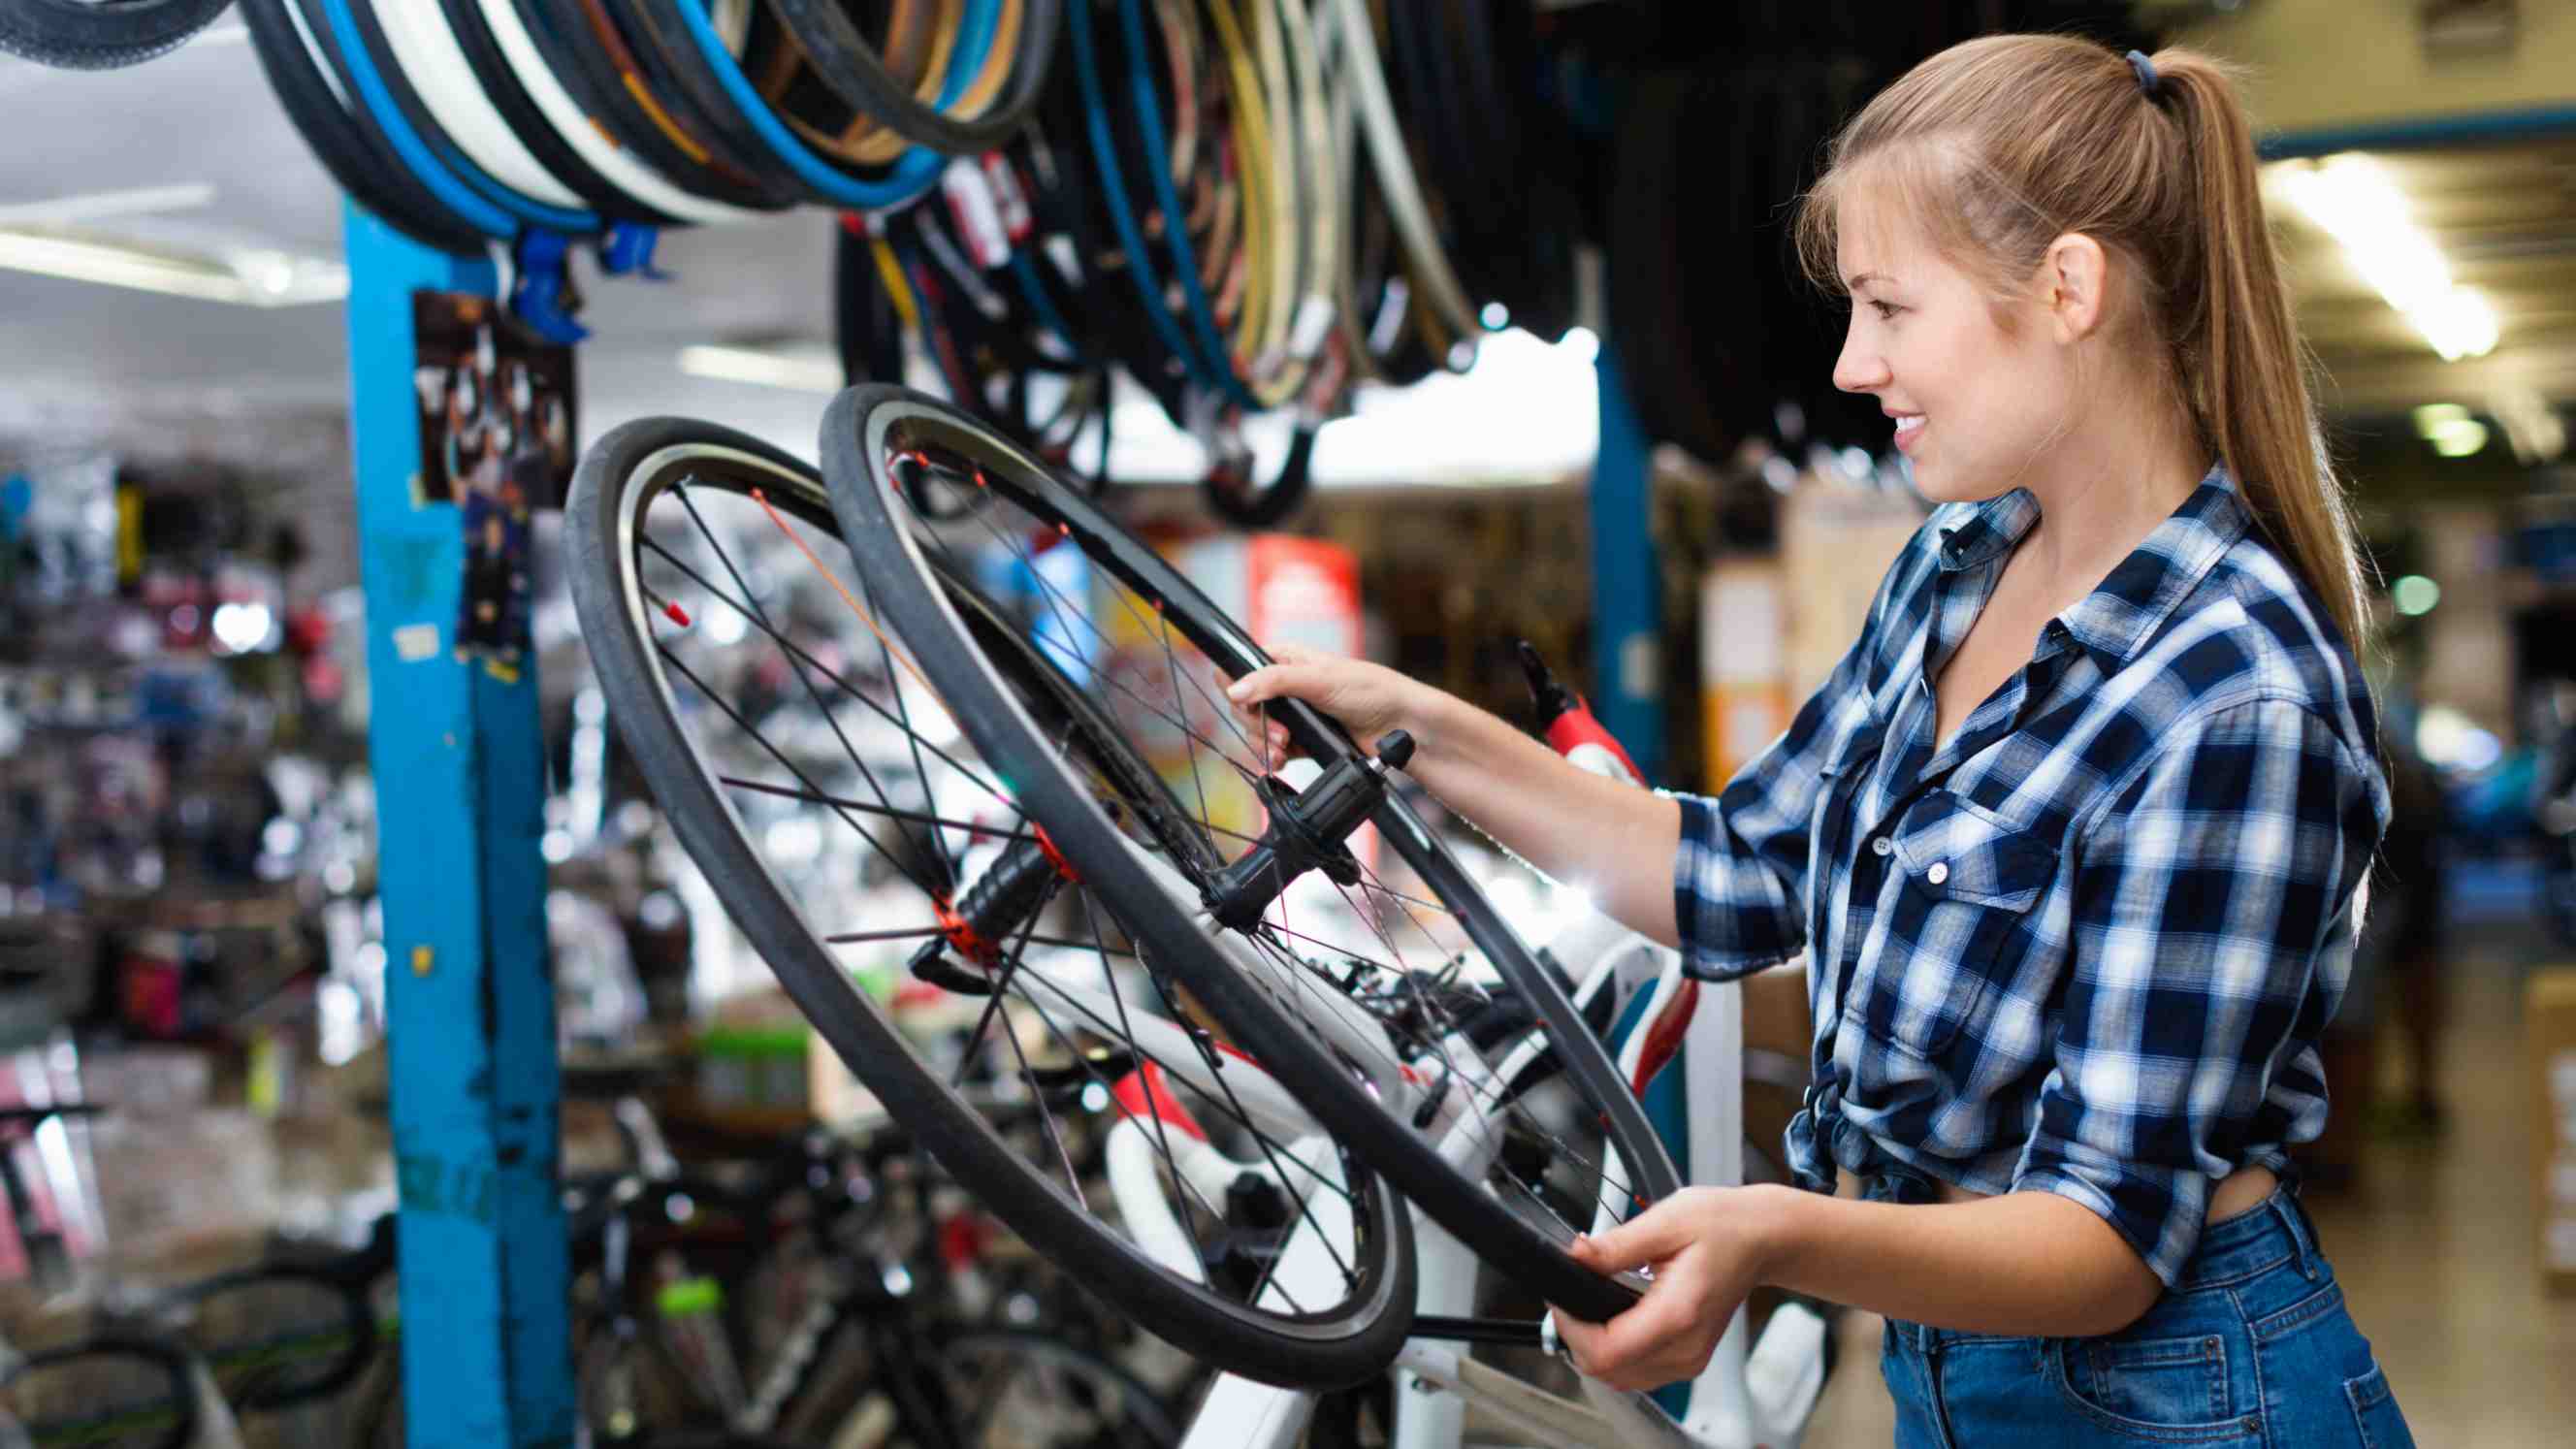 tubeless vs tube: happy female choosing between a tubless or tube tyre system for her bicycle